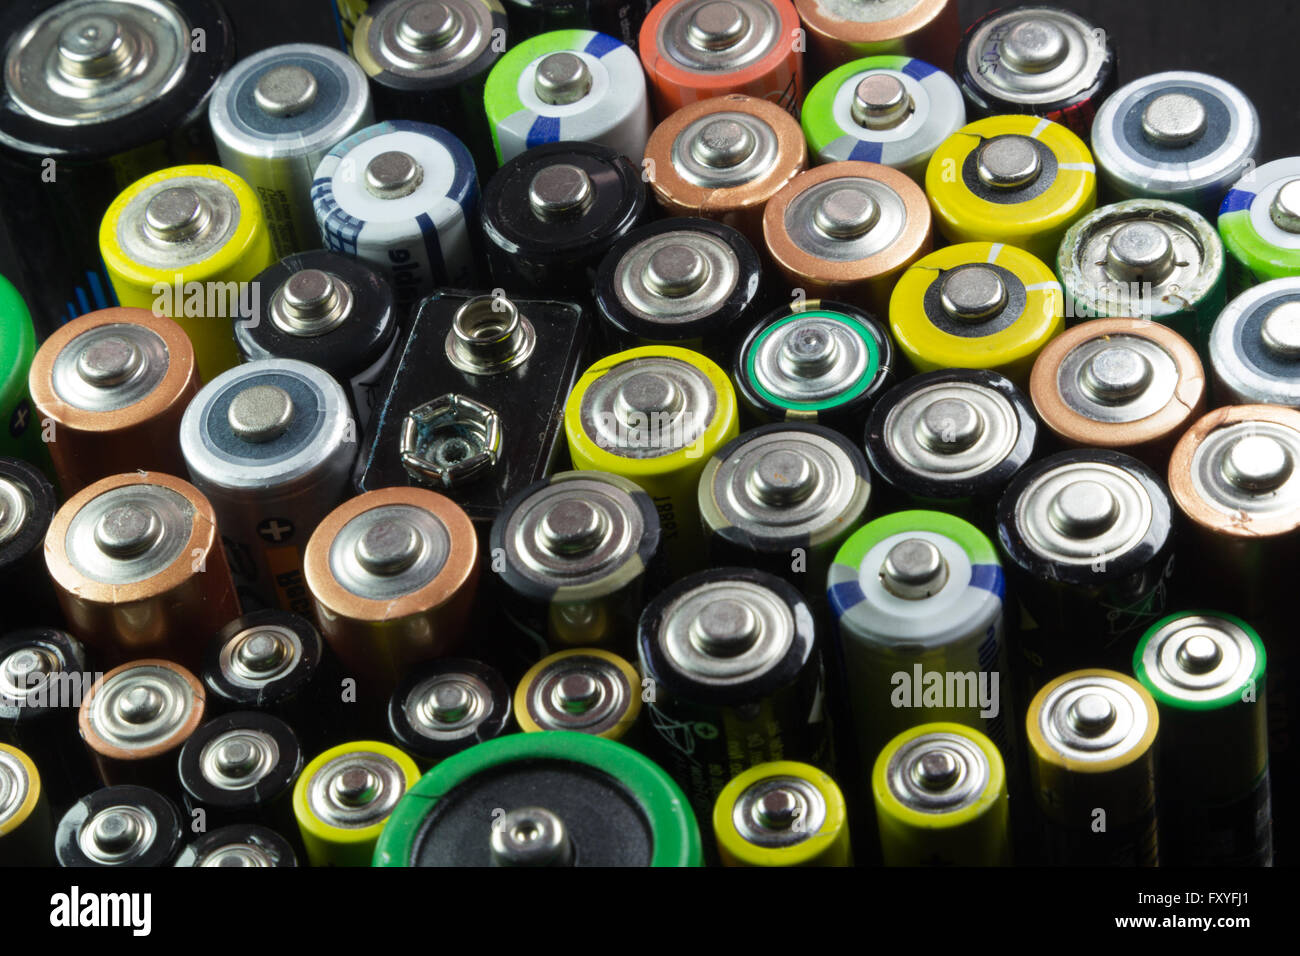 Batteries of different types and colors Stock Photo